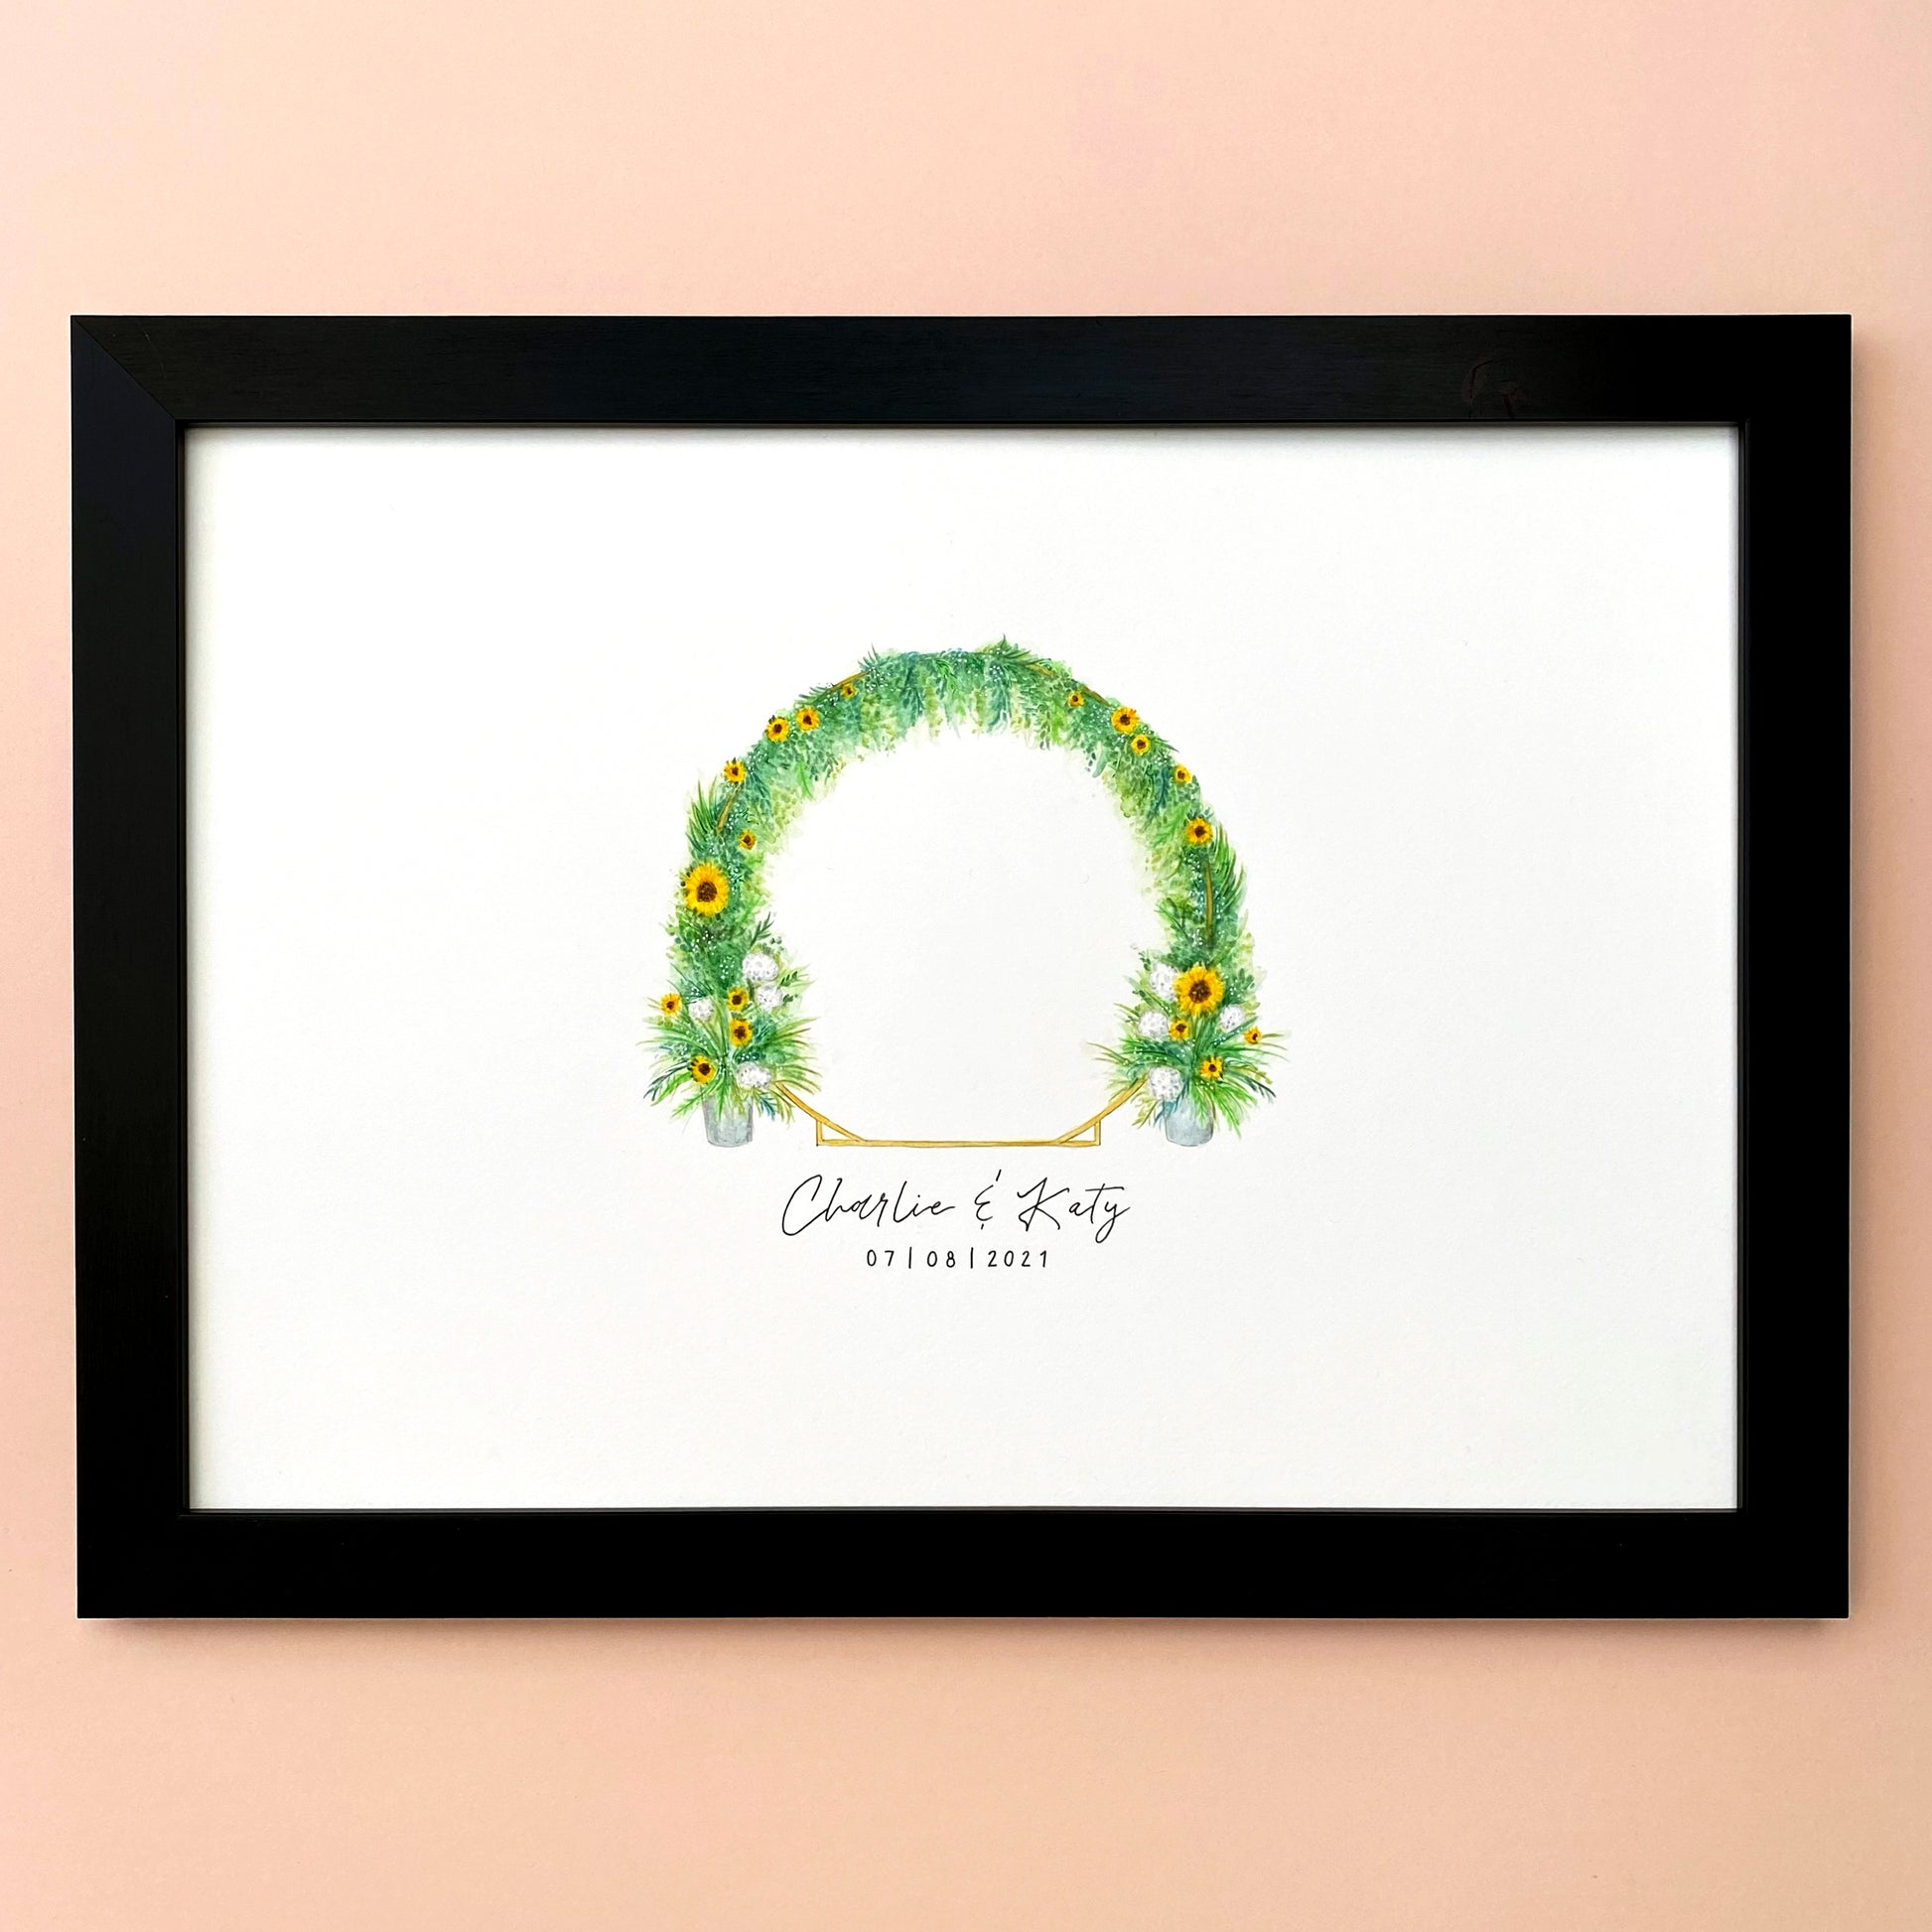 Flower arch wedding gift illustration, created using fine liner, watercolour paints and pencil with the couples name and wedding date below.